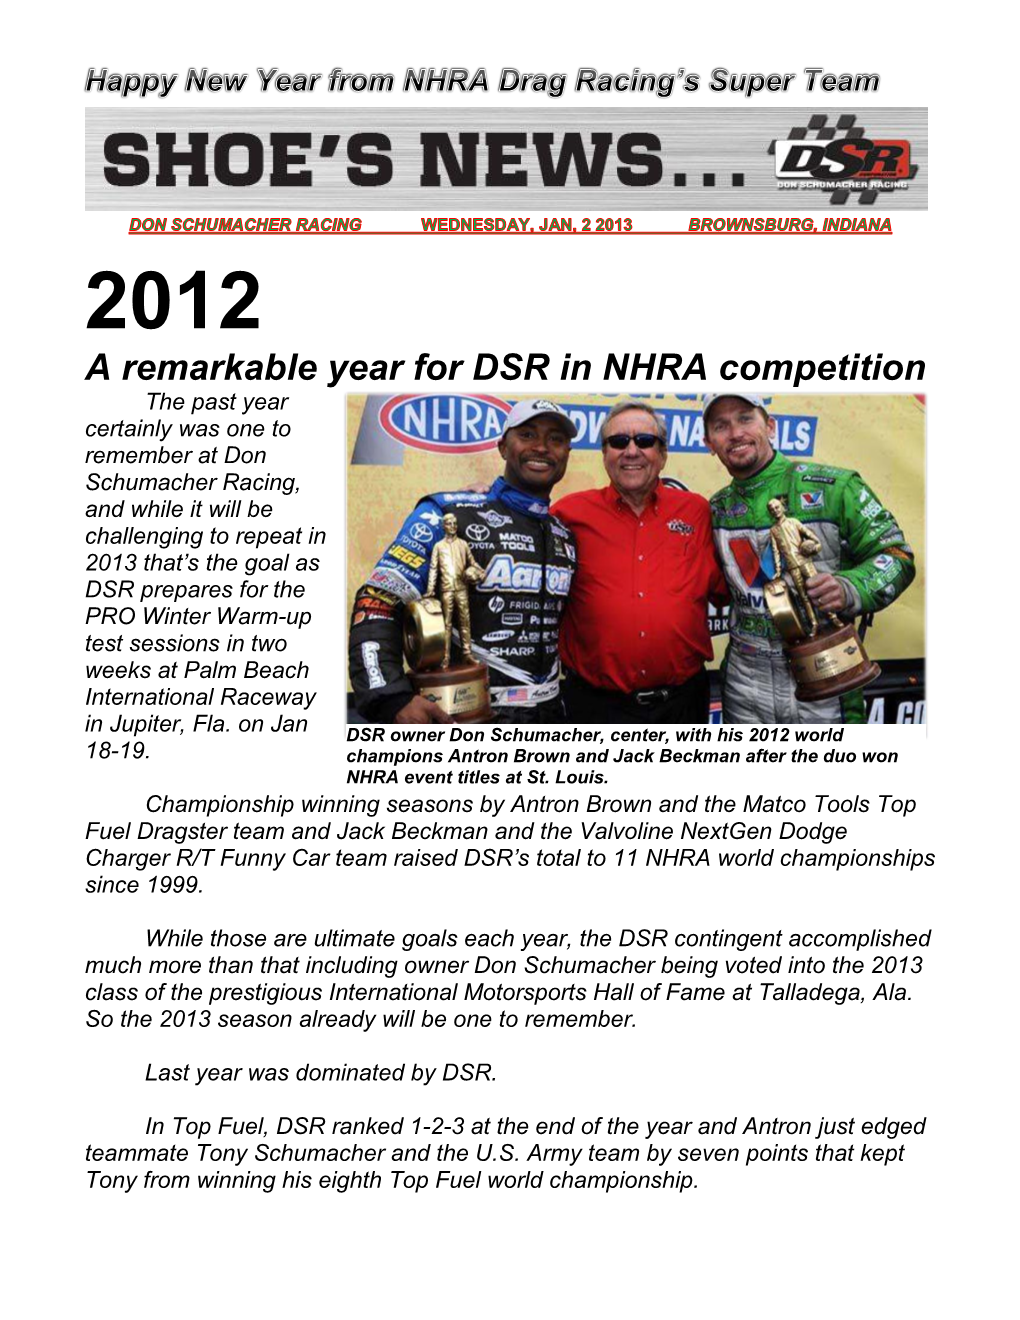 A Remarkable Year for DSR in NHRA Competition